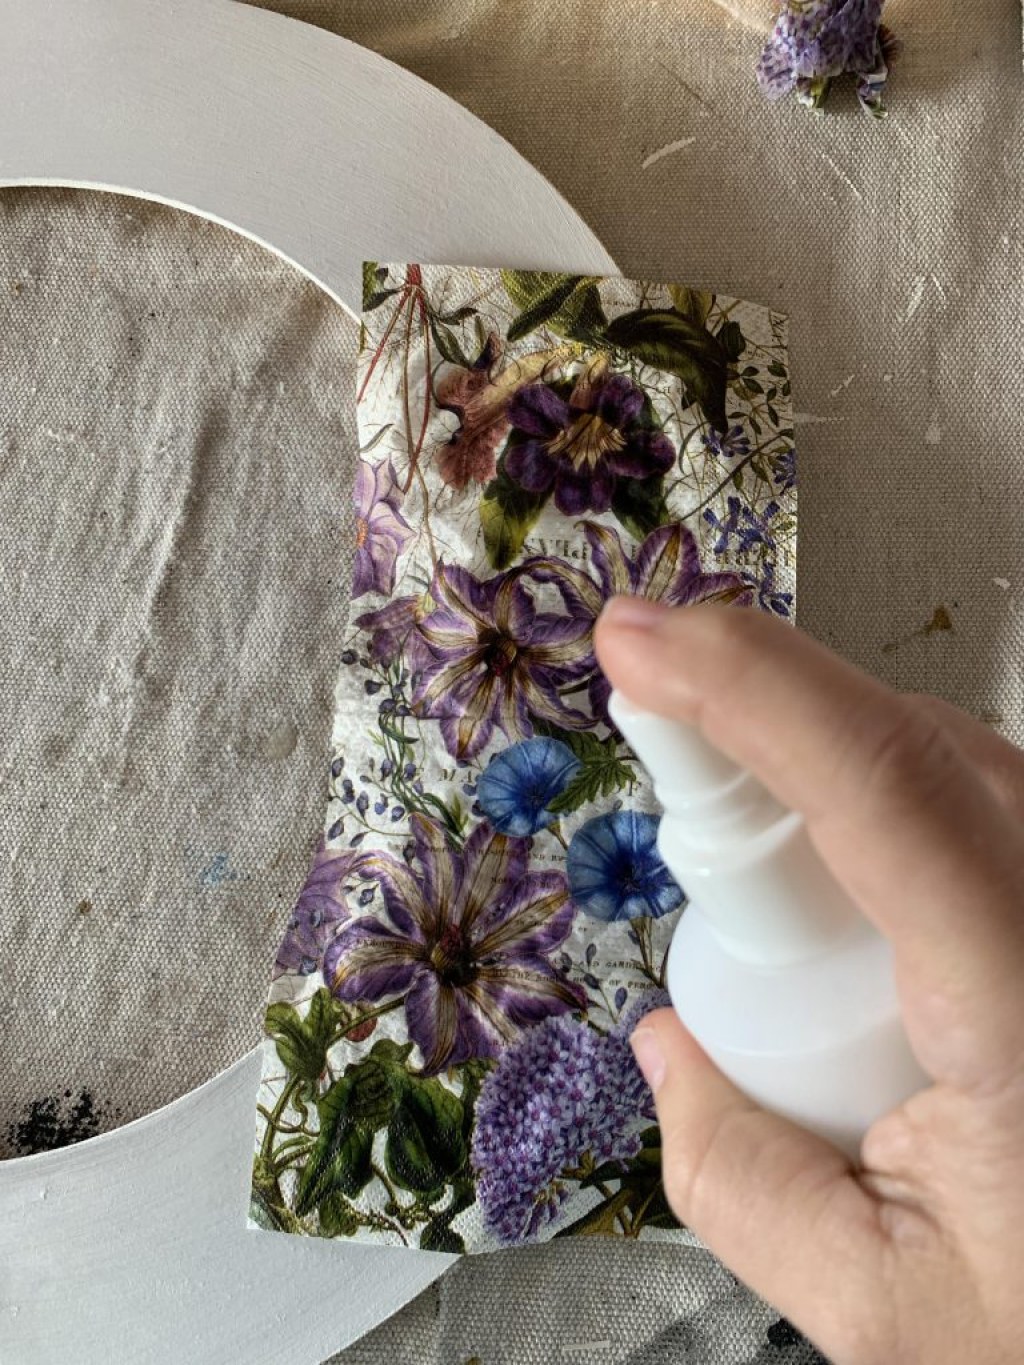 Picture of: How to Update a Mirror with Decoupage